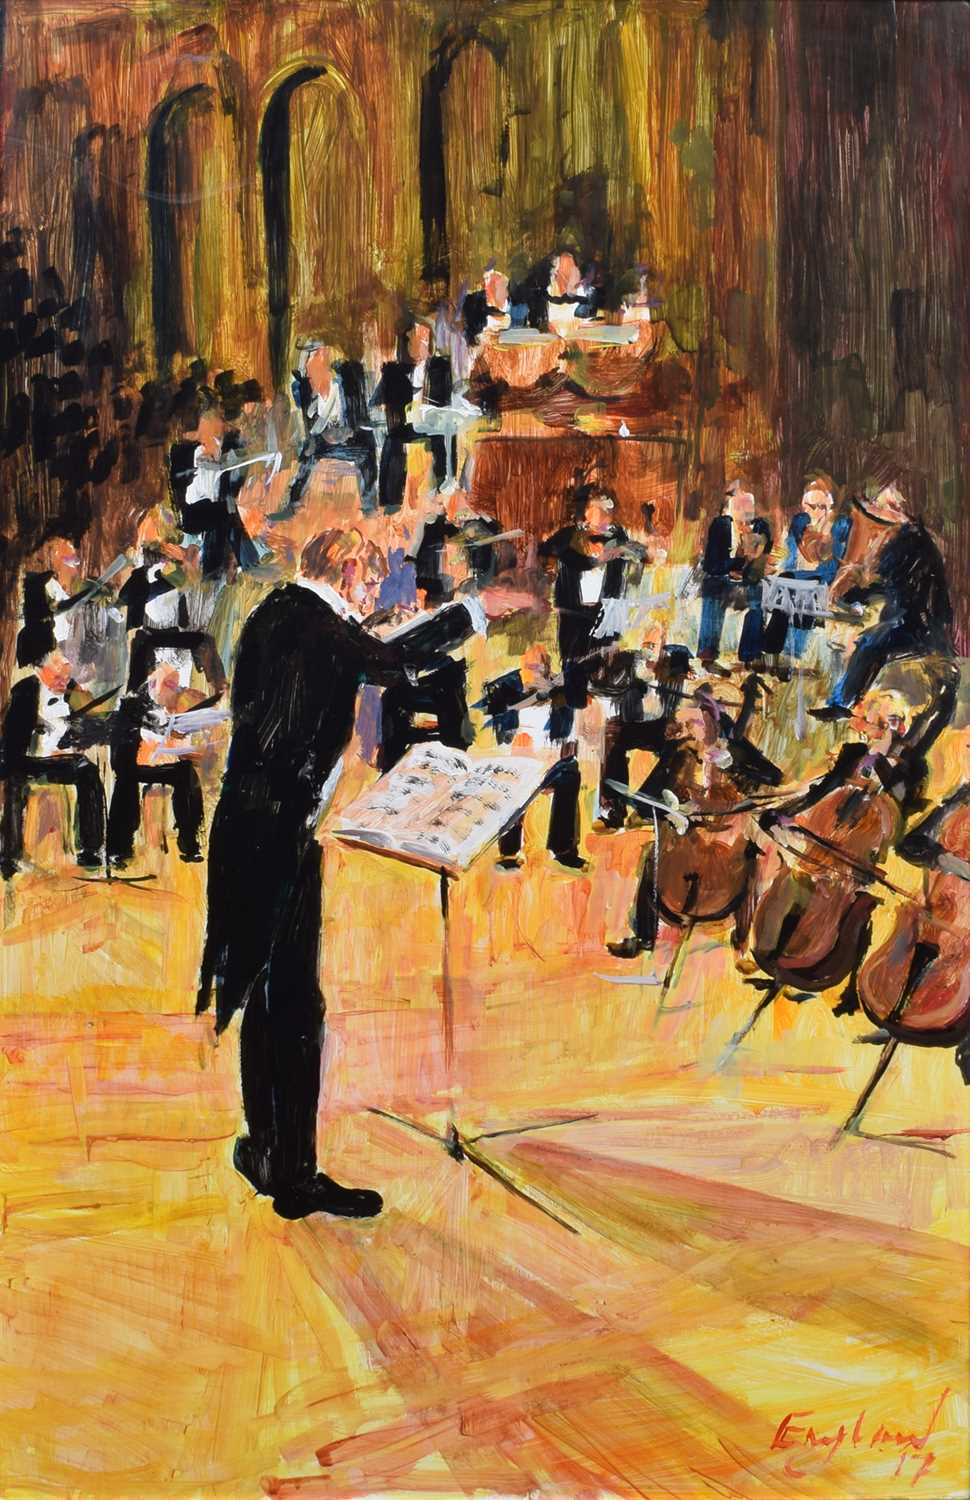 Lot 65 - Frederick England, "Orchestral Event - The Conductor Convenes", acrylic.